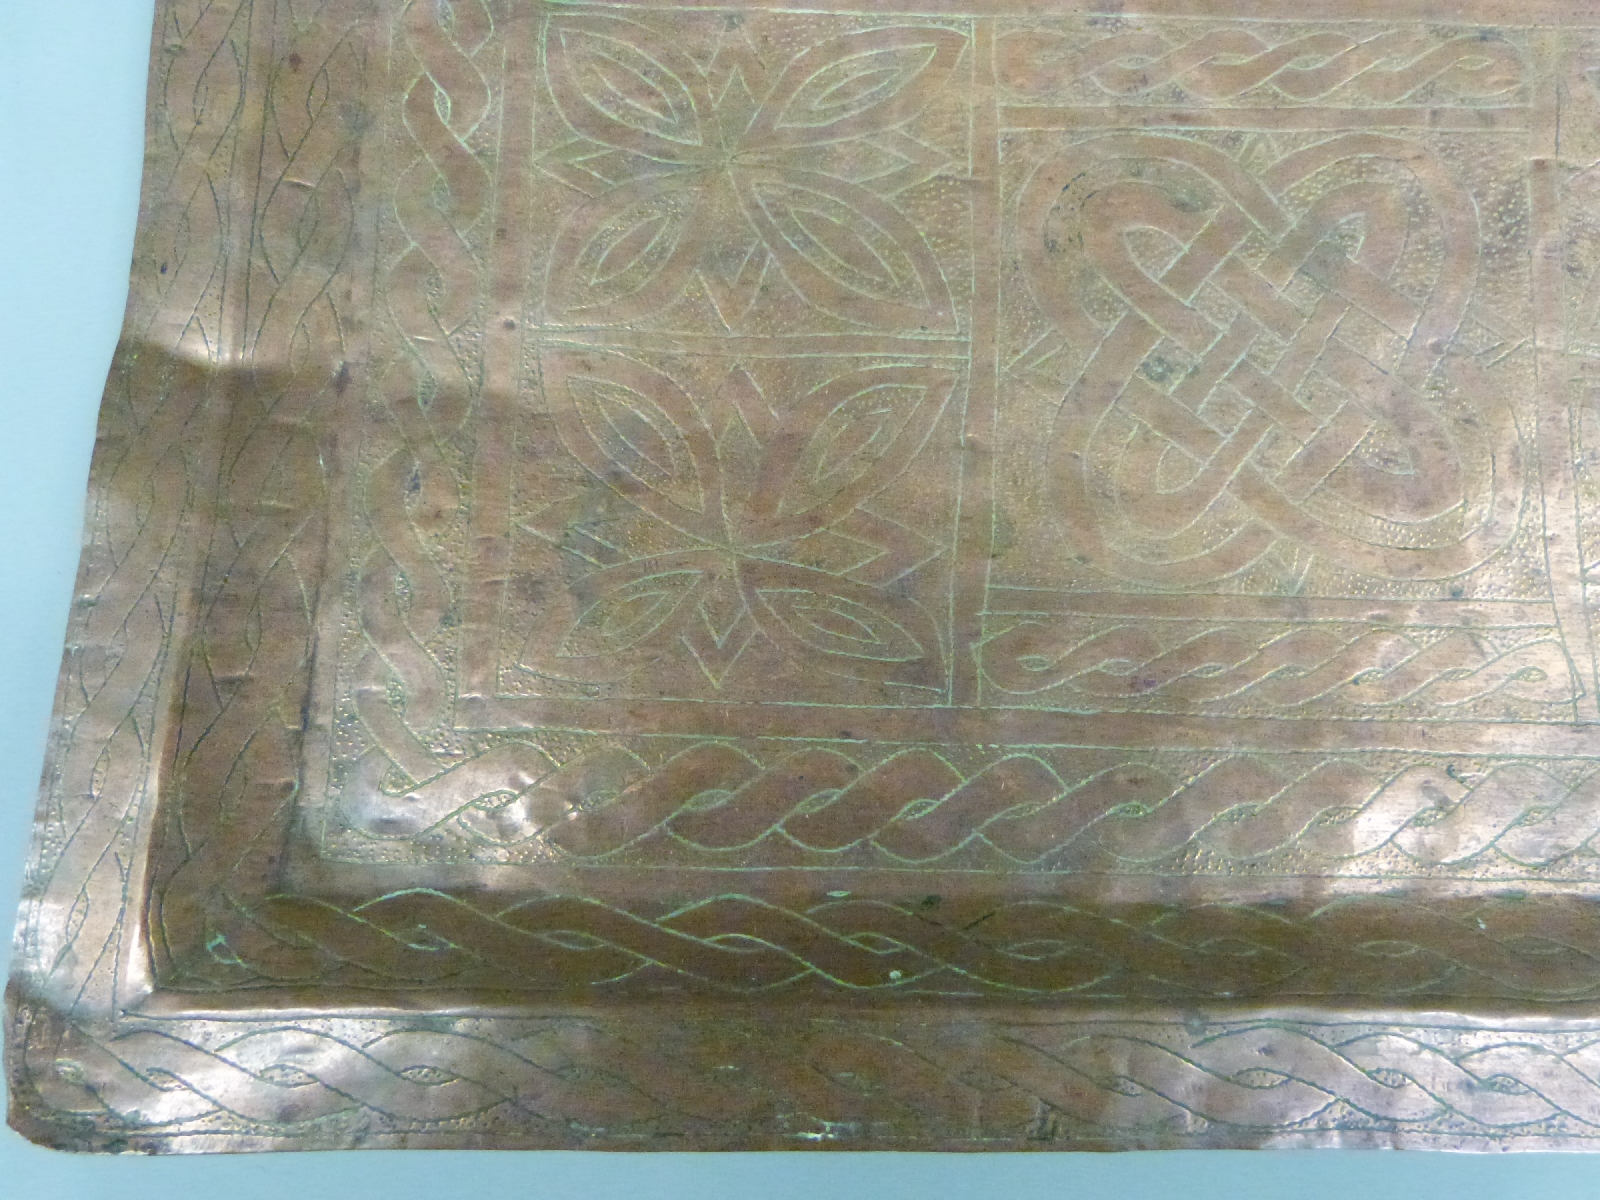 Nigerian tribal art hammered copper tray by Aikina Madu Kano decorated with intertwining patterns, - Image 2 of 3